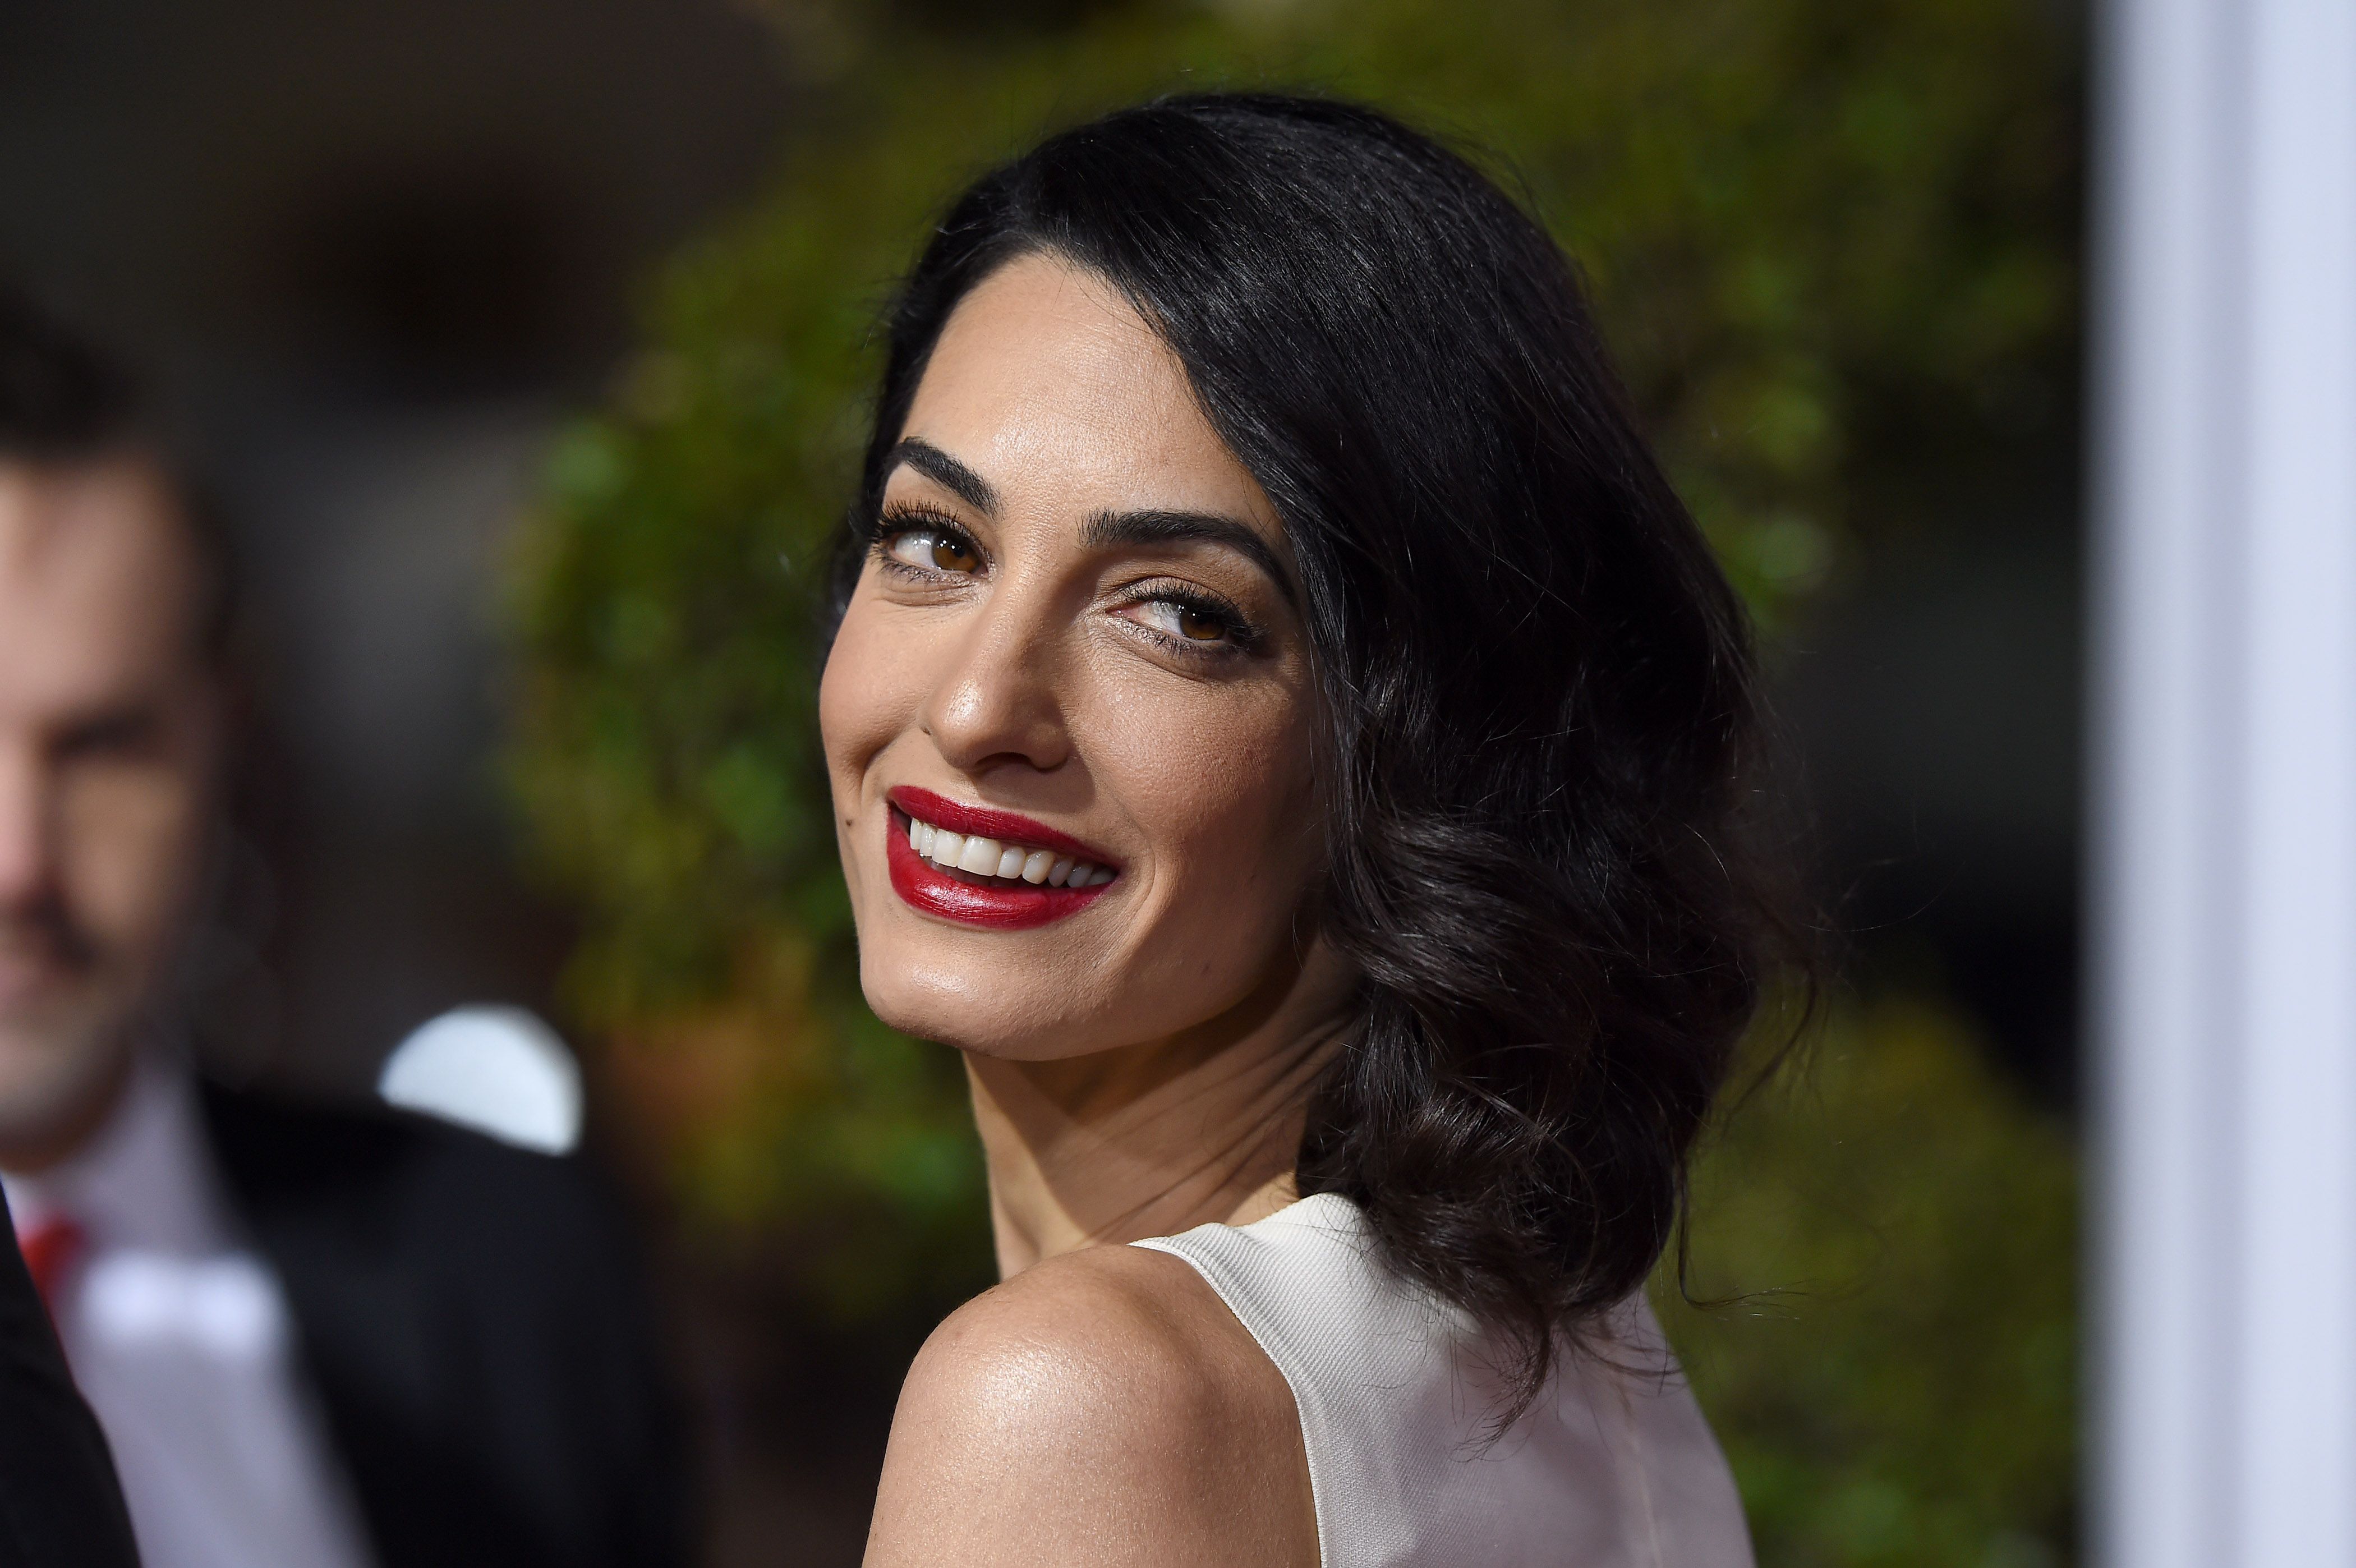 Amal Clooney Debuts Short Hair at the 'Hail, Caesar!' Premiere in Christian  Dior 'Songe' Pumps | Amal clooney, Short hair styles, Asian celebrities